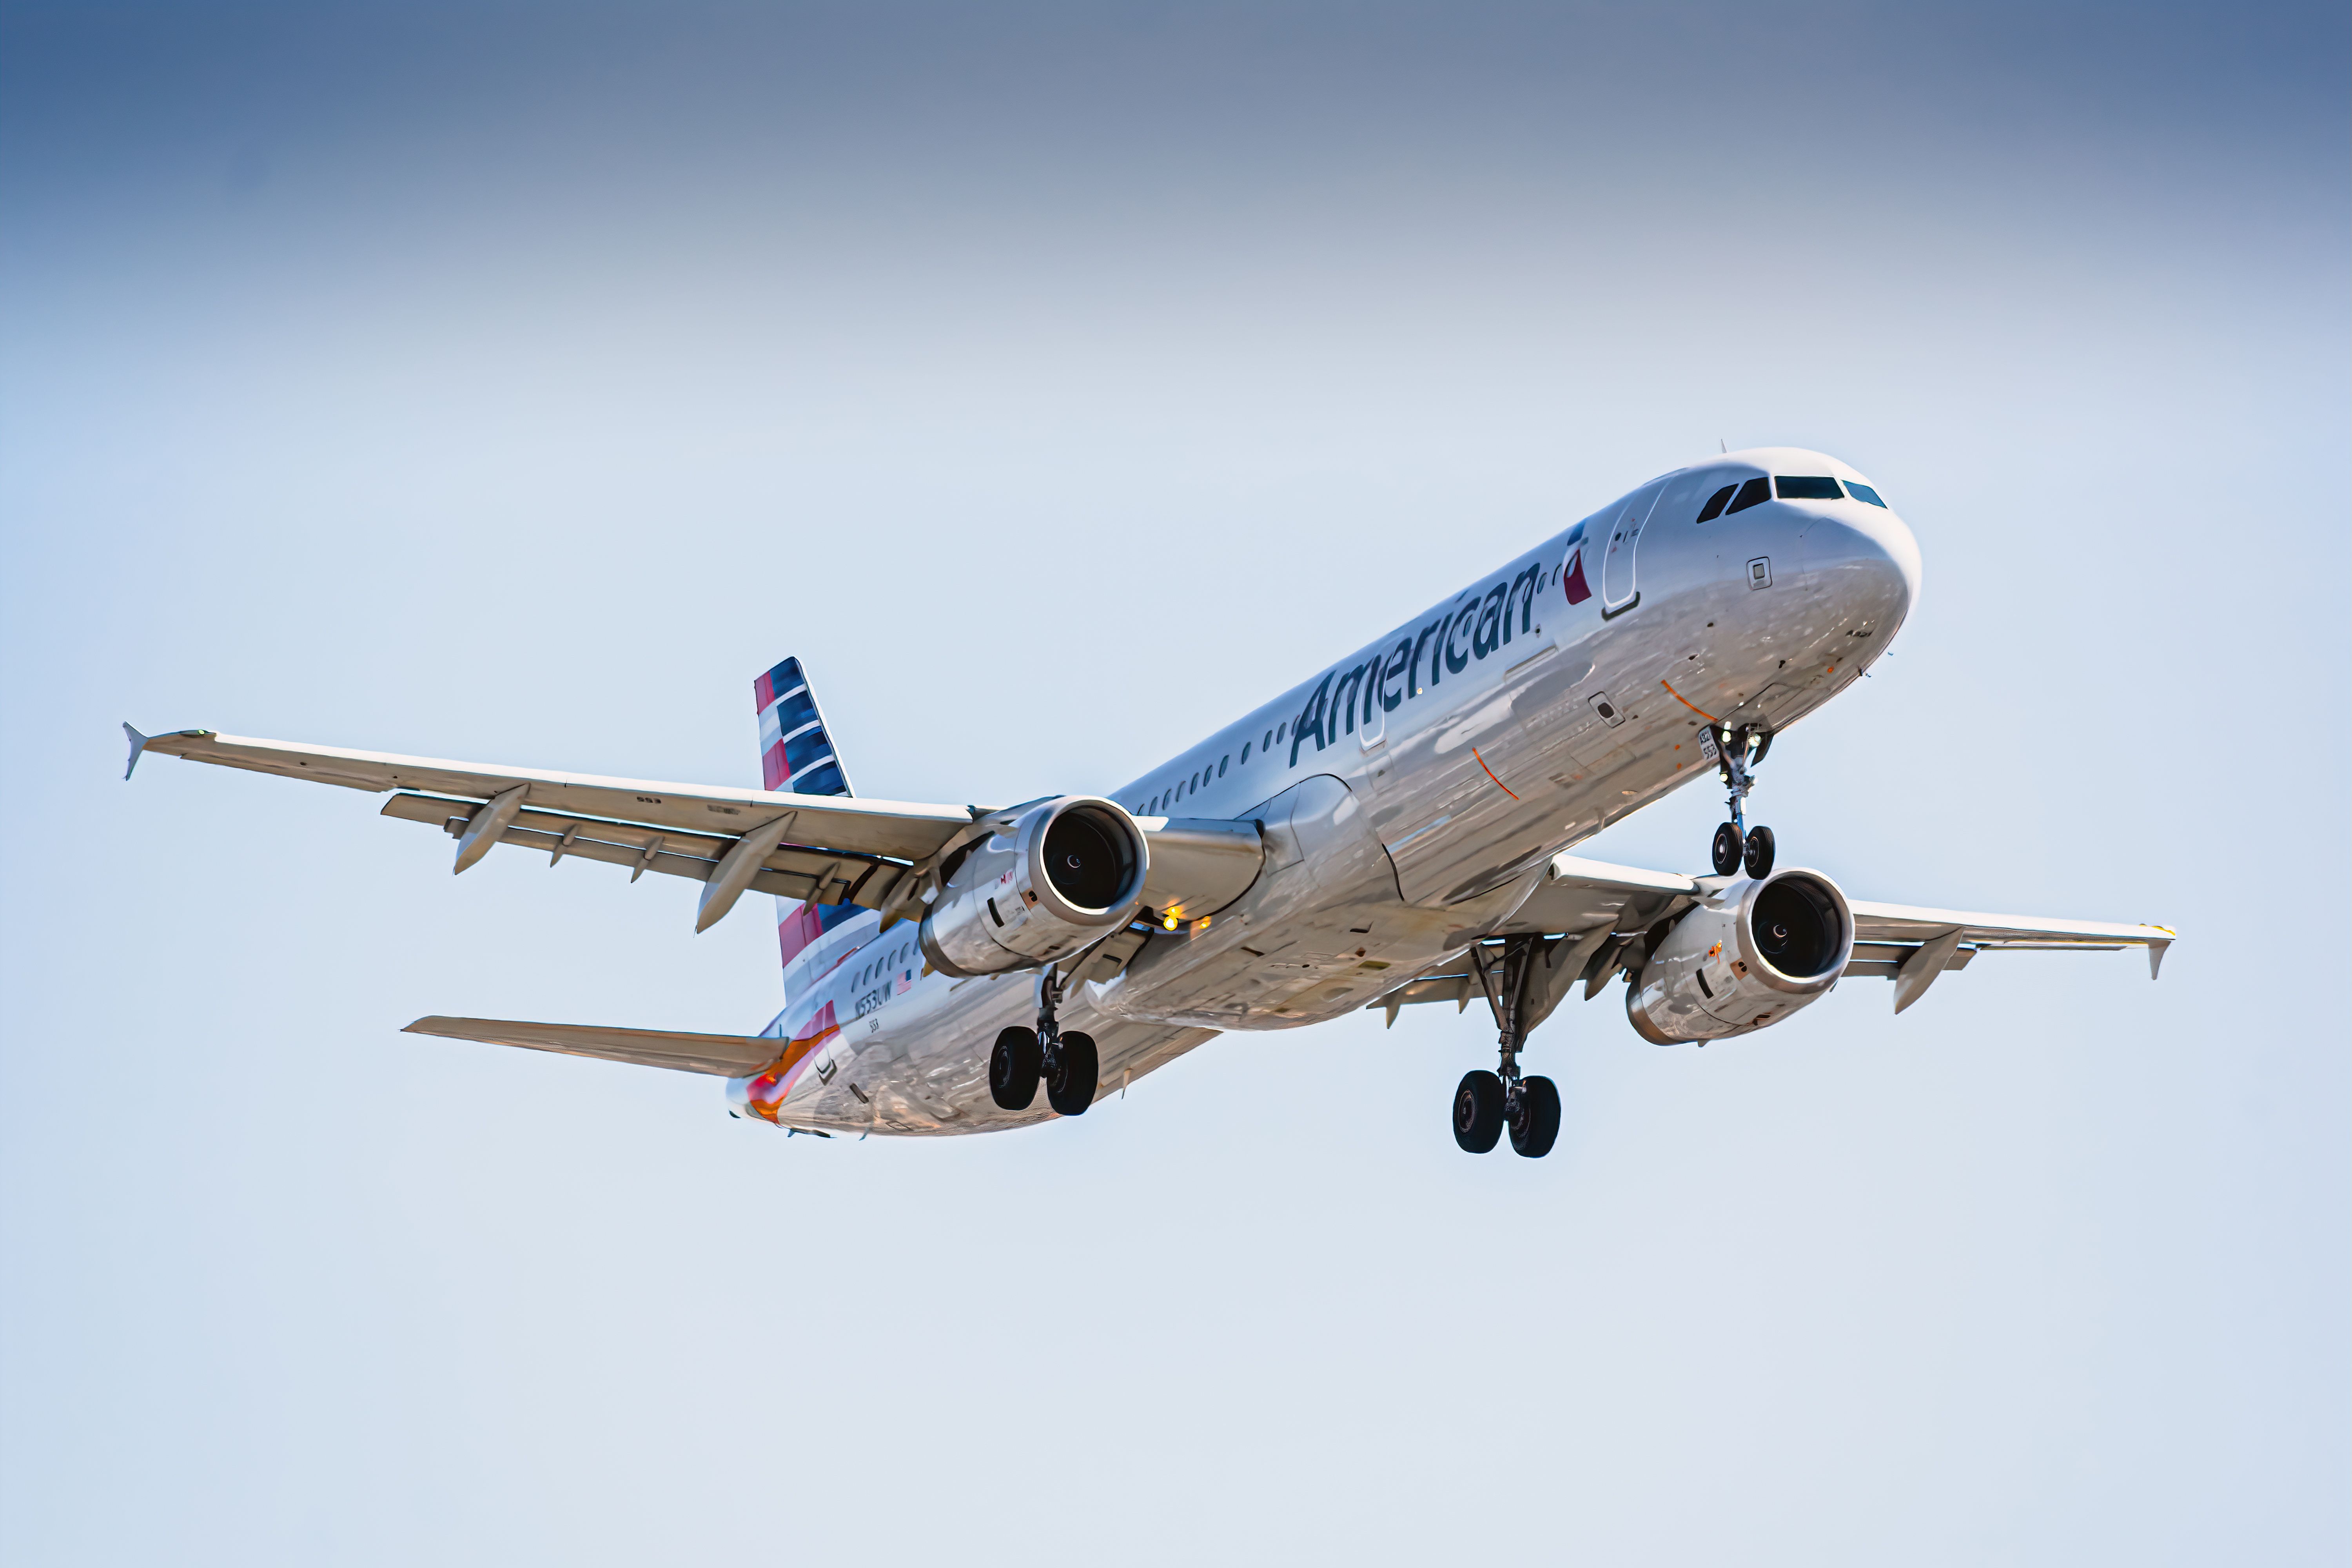 American Airlines Airbus A320 landing at LAX